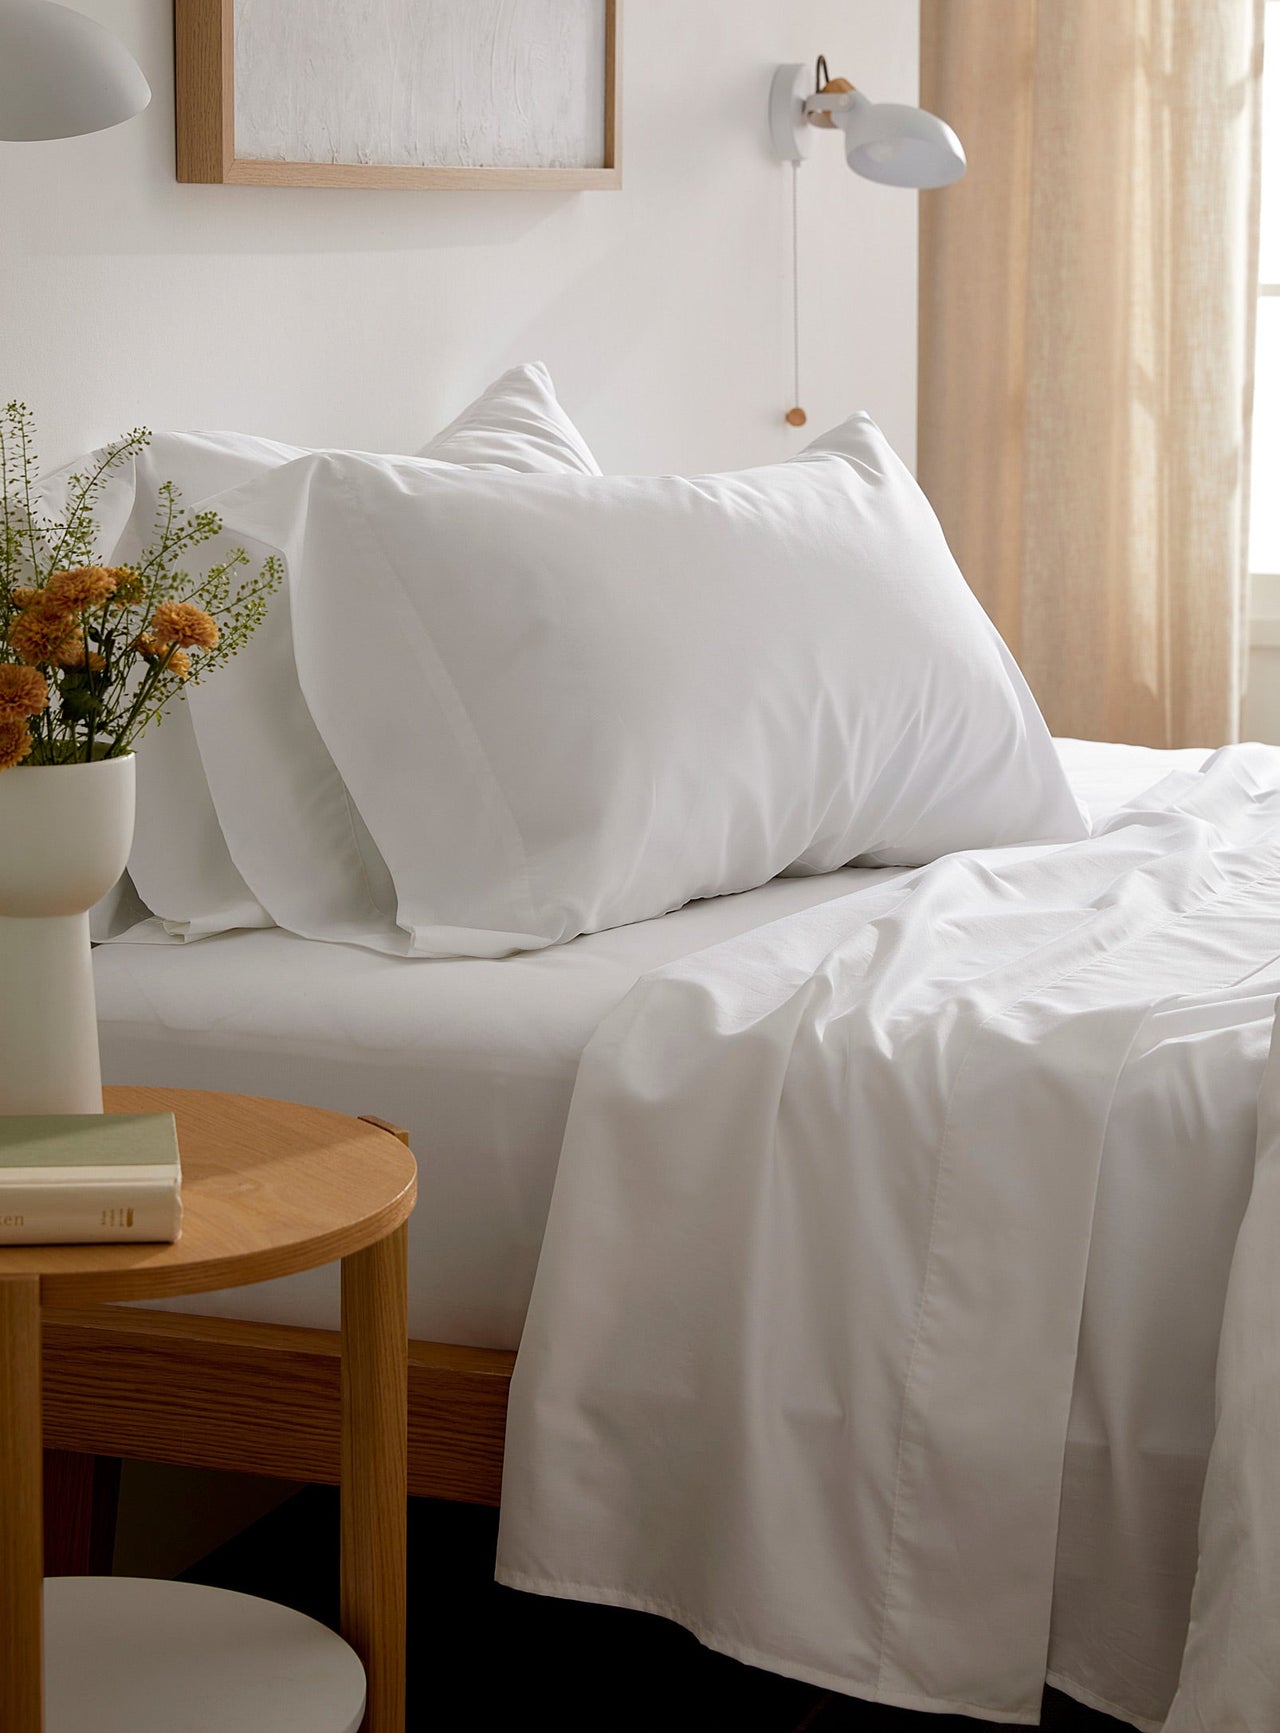 Egyptian cotton and bamboo rayon 330-thread-count sheet set